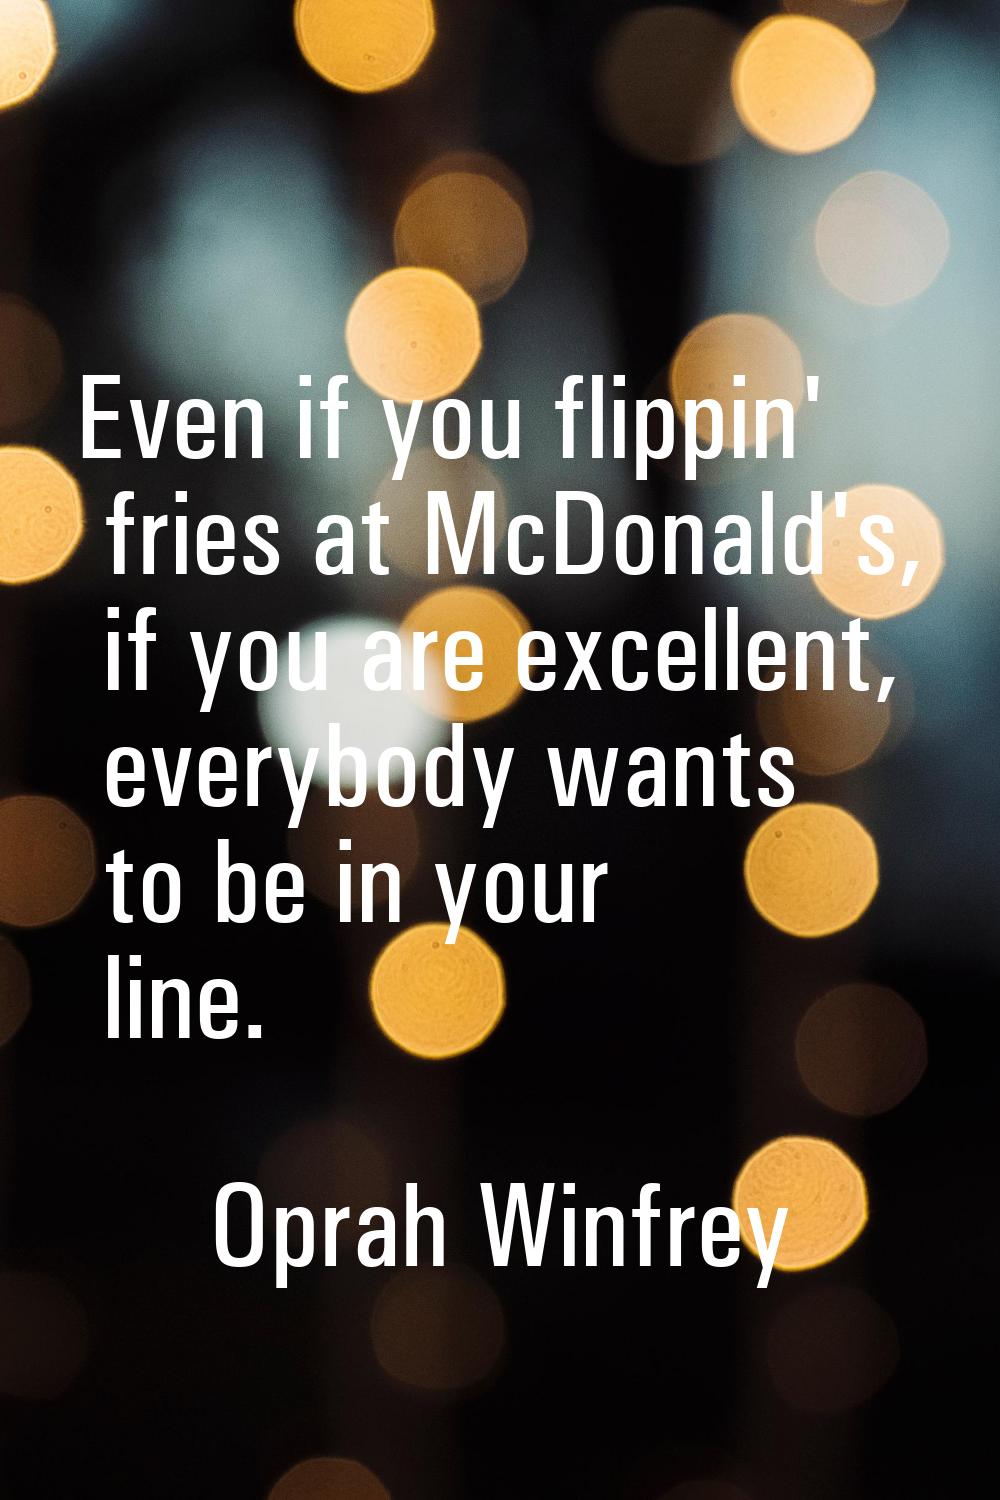 Even if you flippin' fries at McDonald's, if you are excellent, everybody wants to be in your line.